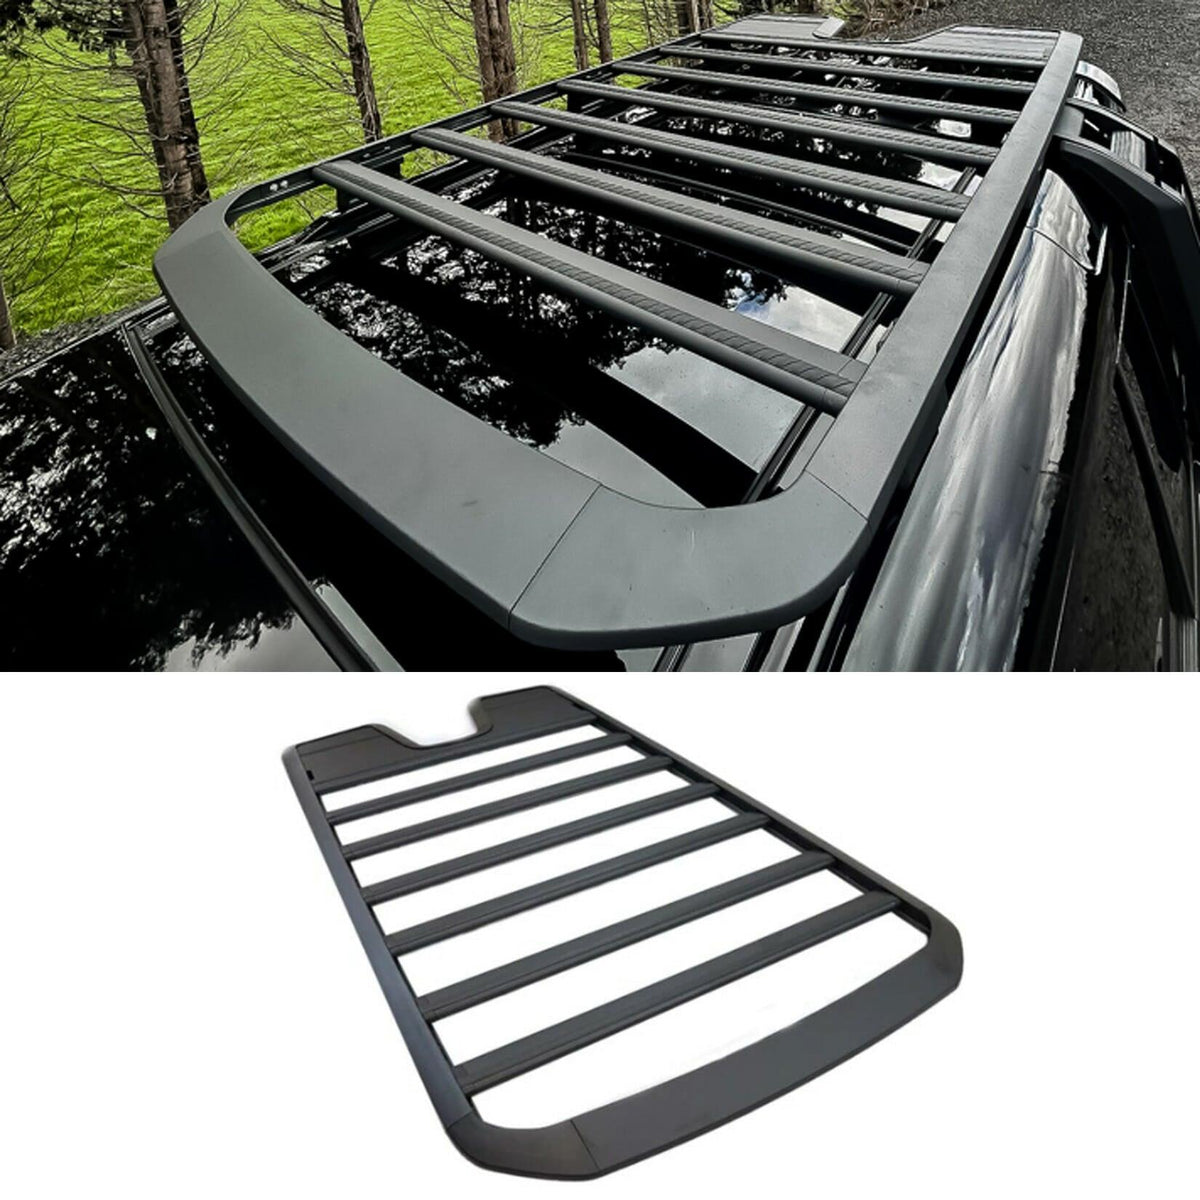 LAND ROVER DEFENDER 110 L663 2020 ON OE STYLE ROOF RACK IN BLACK - Storm Xccessories2